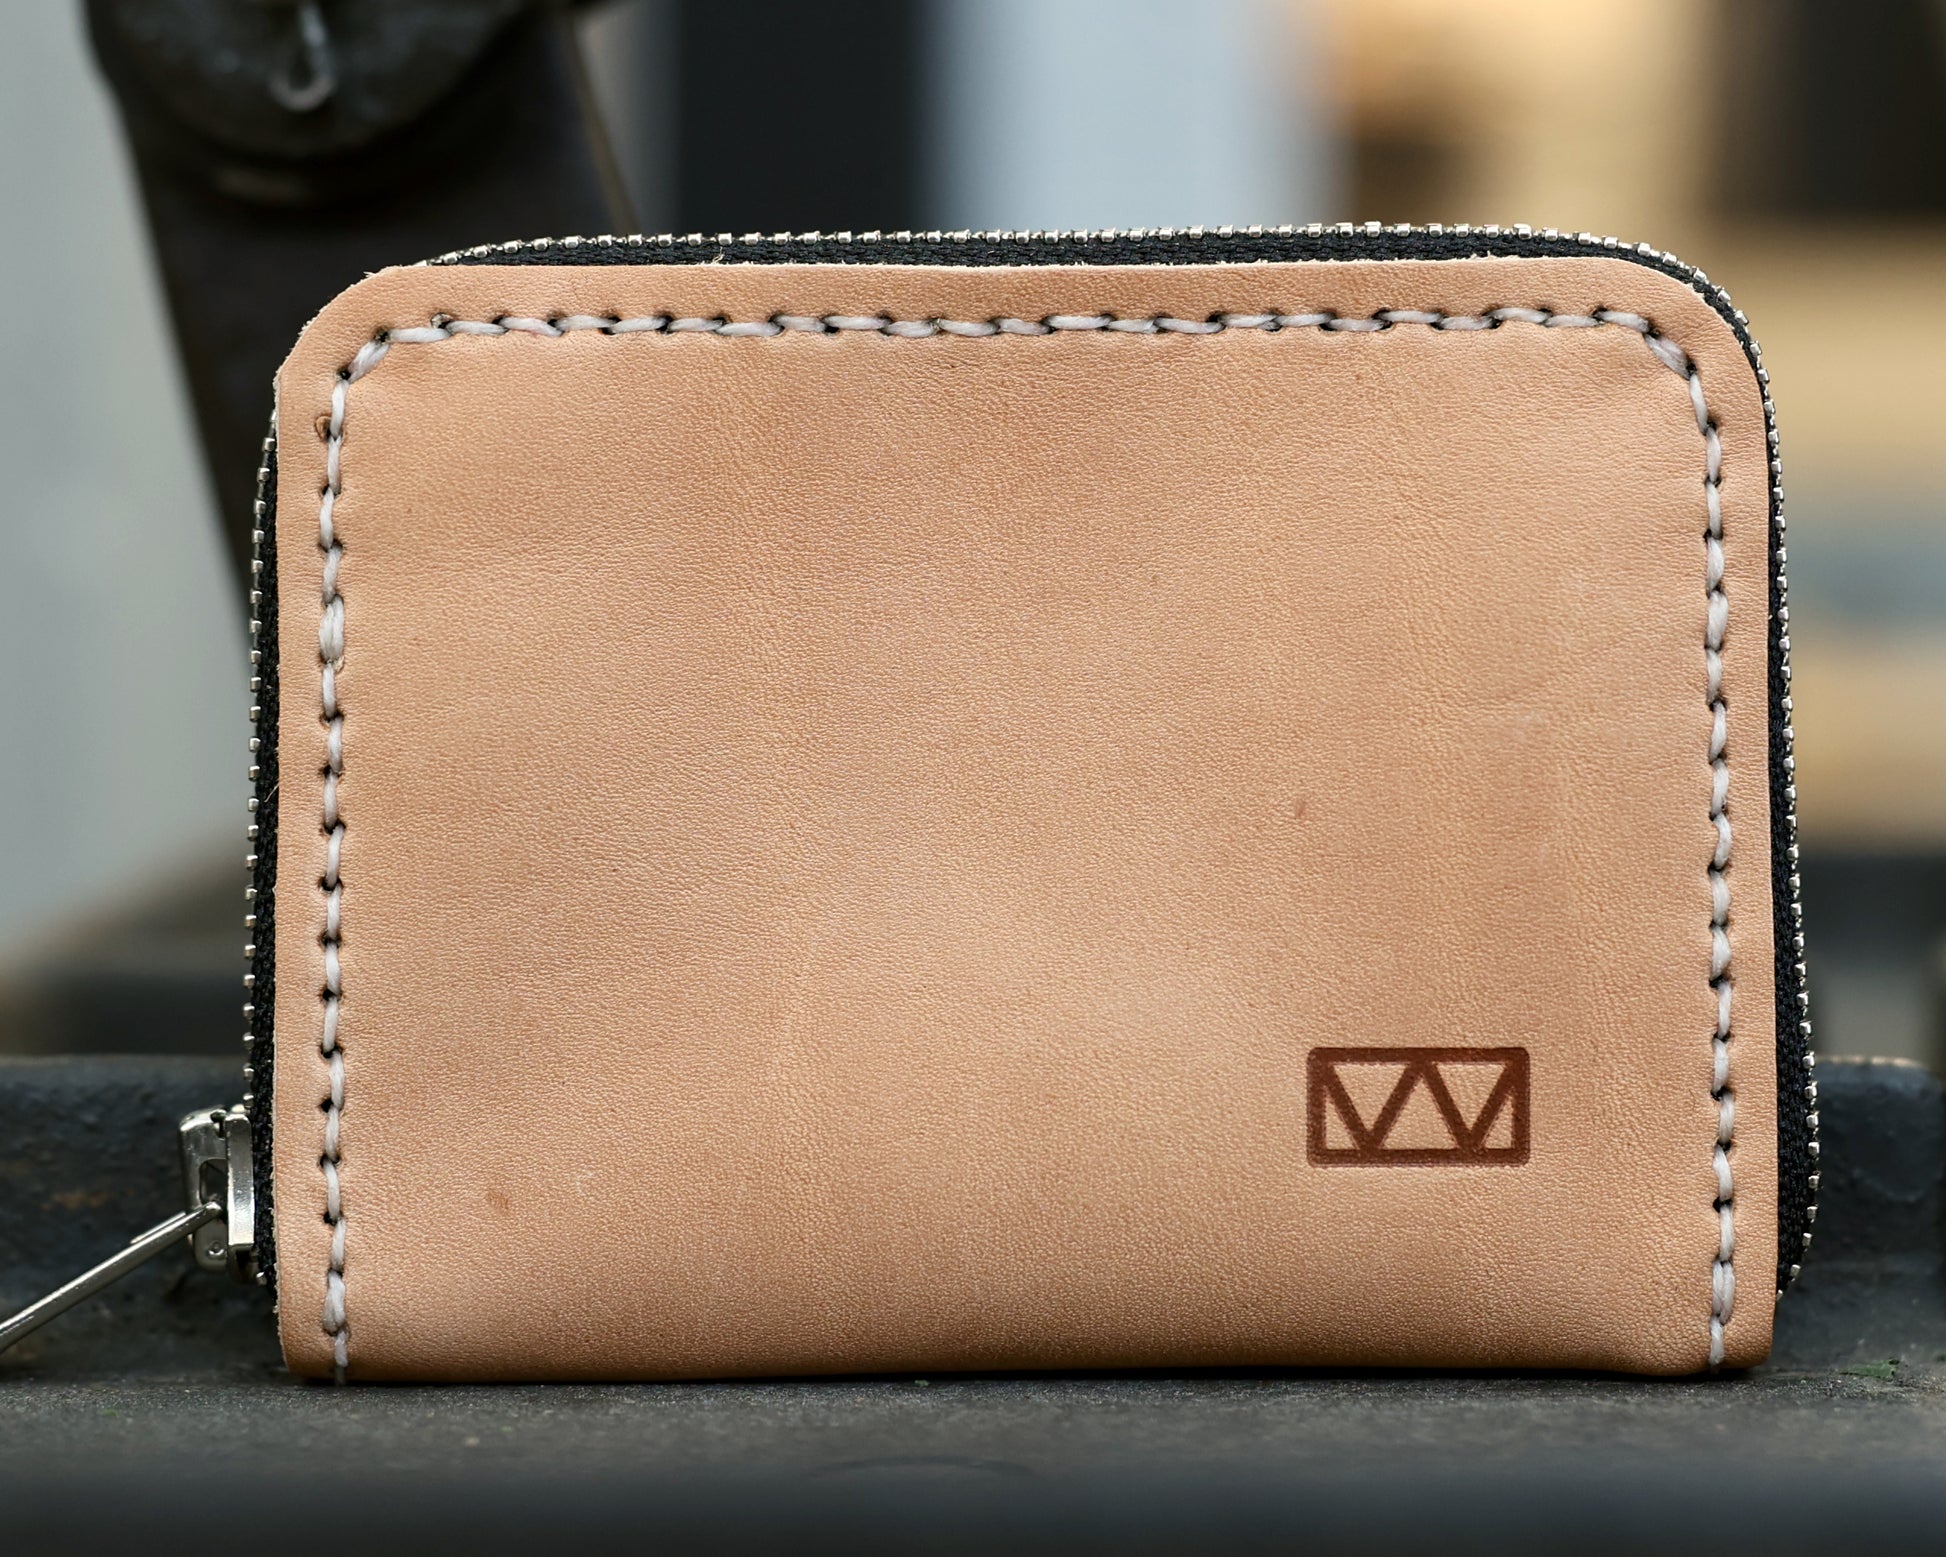 Harper Card Holder with Airtag Slot (Vegetable-Tanned Cowhide